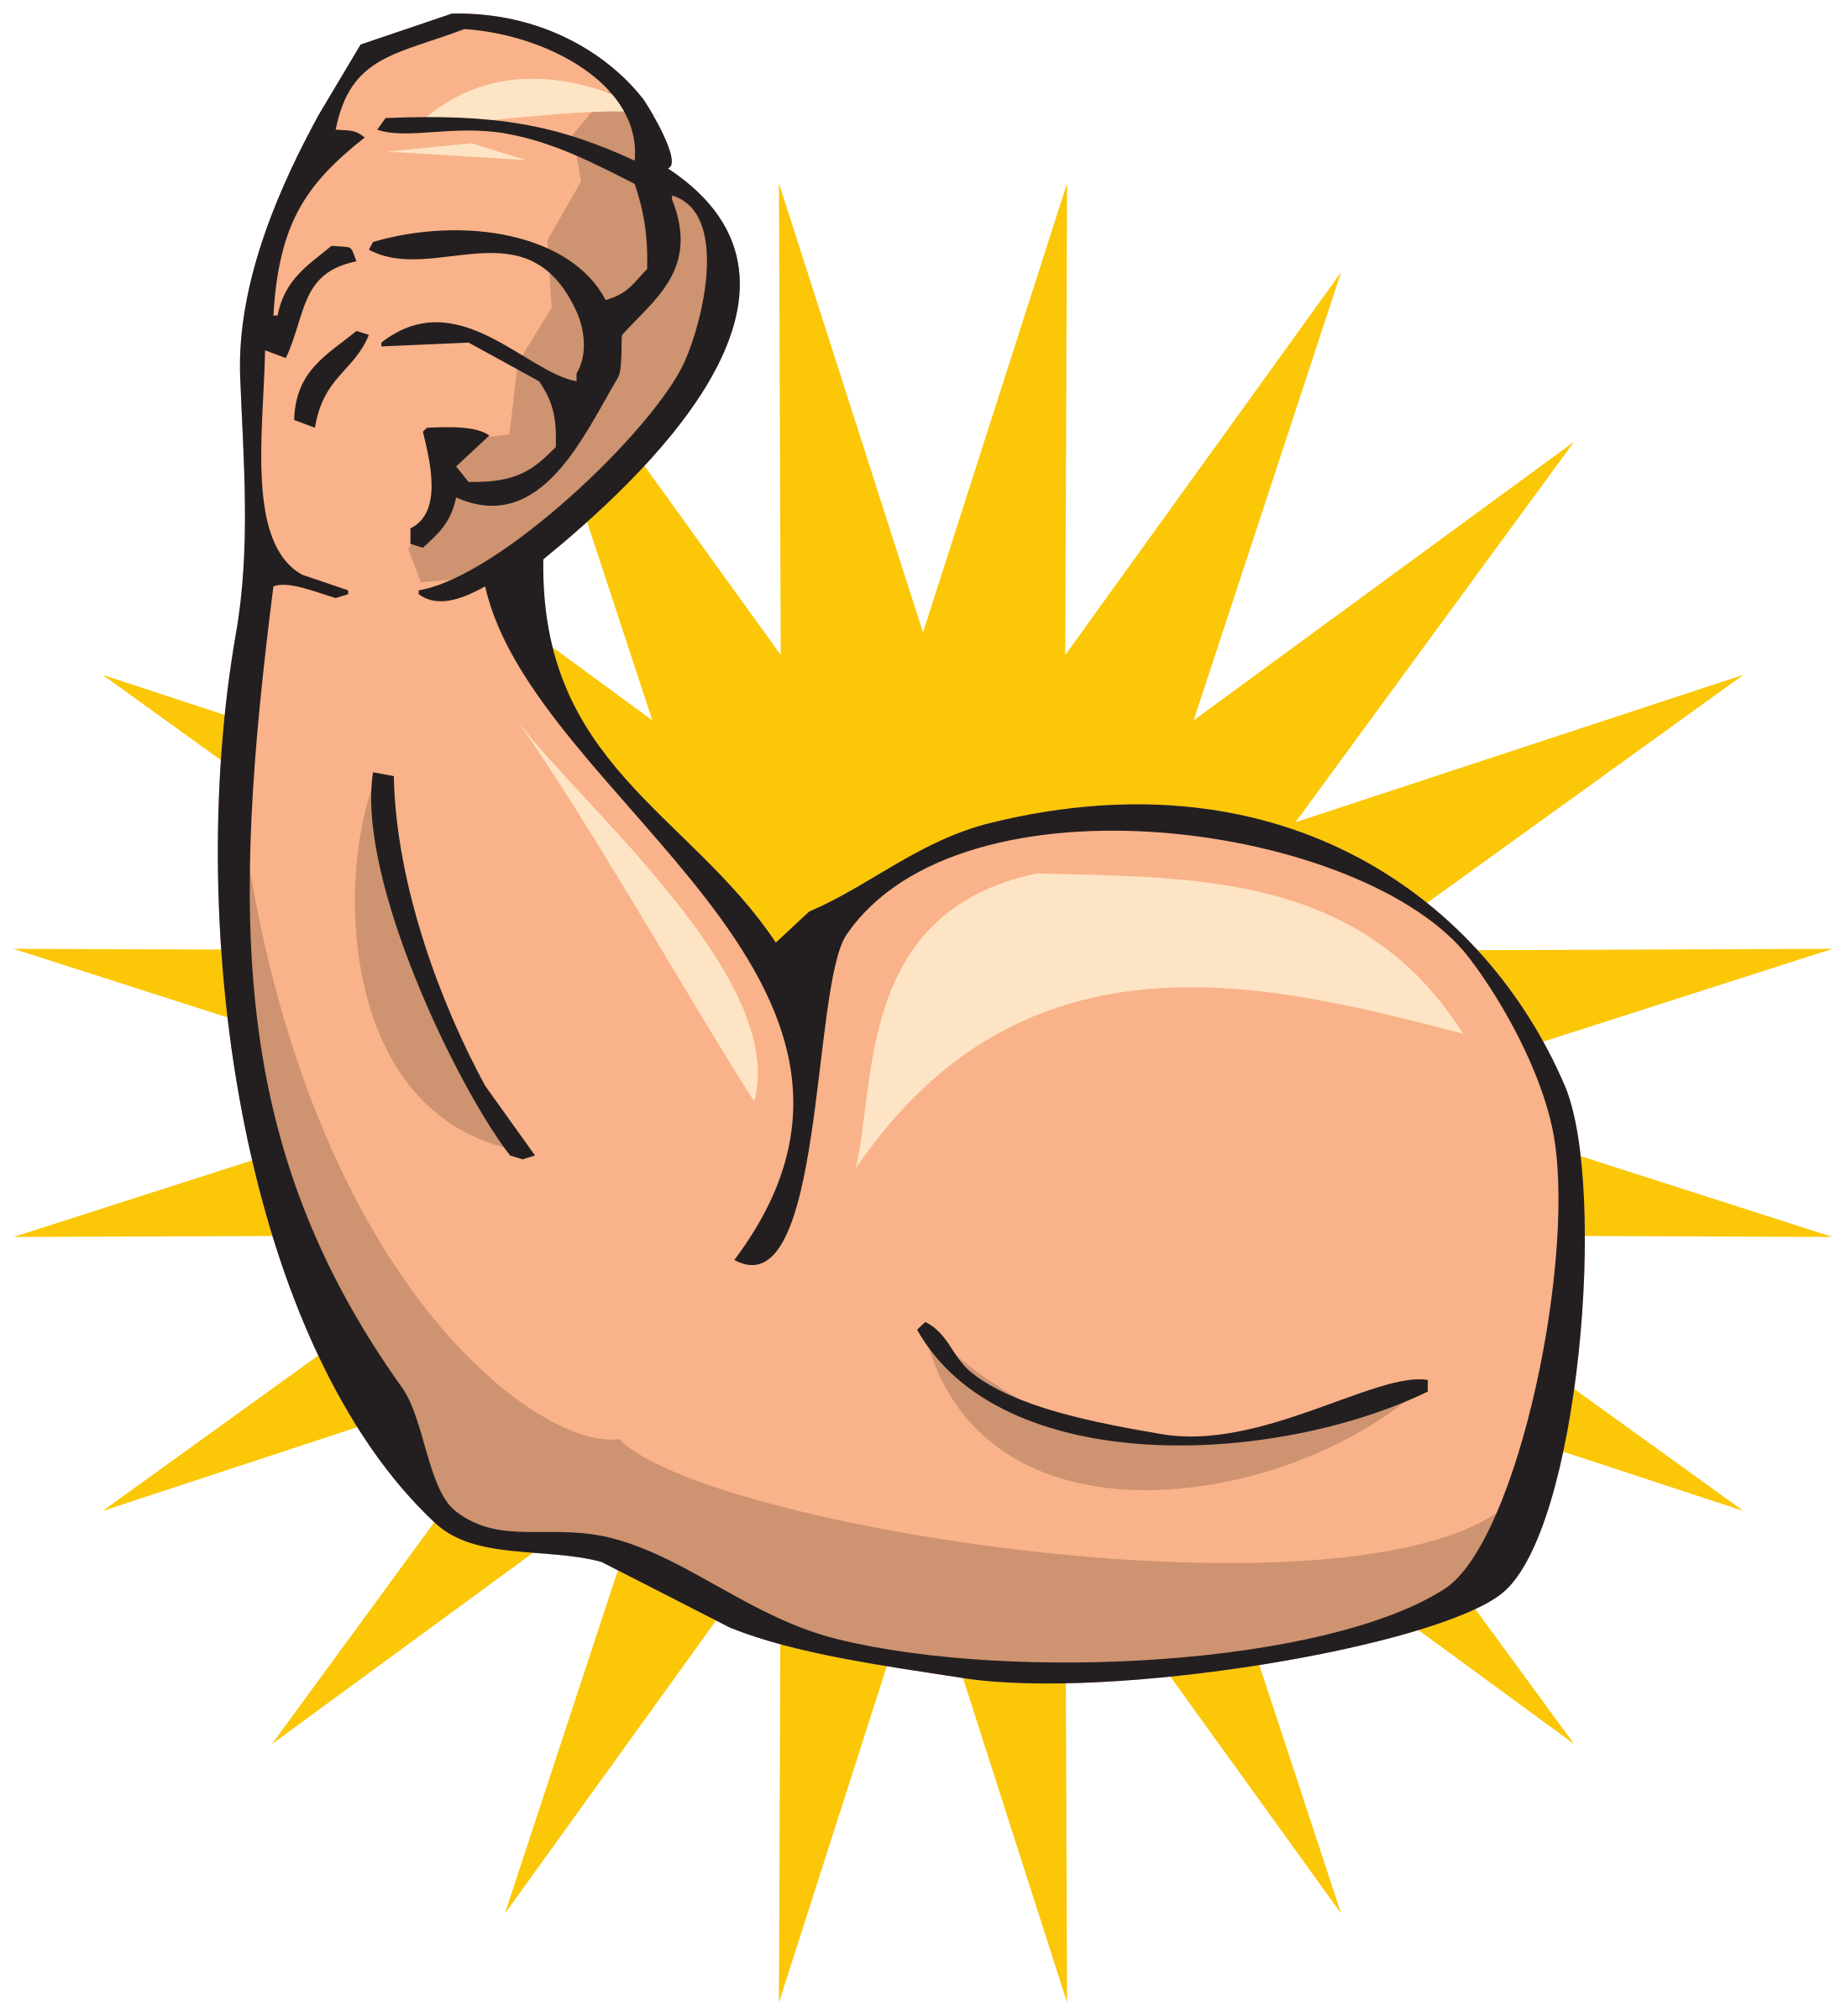 Arm big image png. Fist clipart strong fist